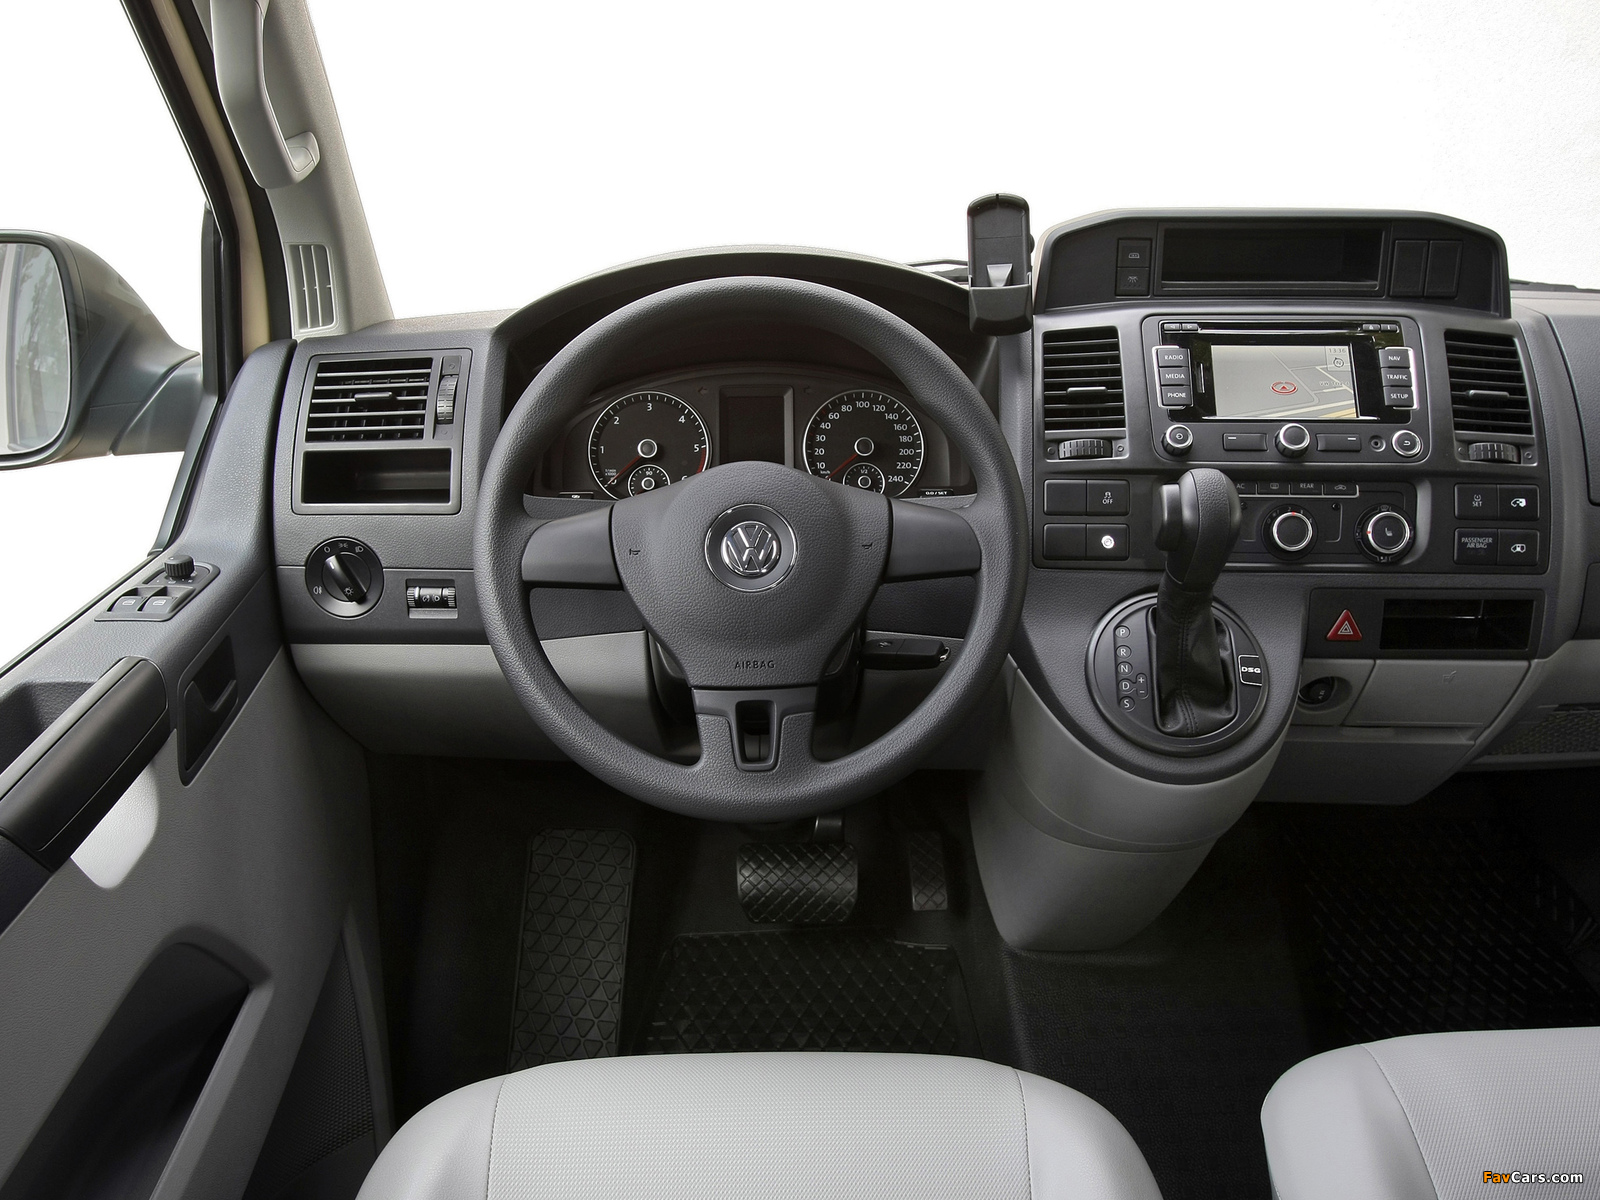 Volkswagen T5 Caravelle Taxi 2009 photos (1600 x 1200)